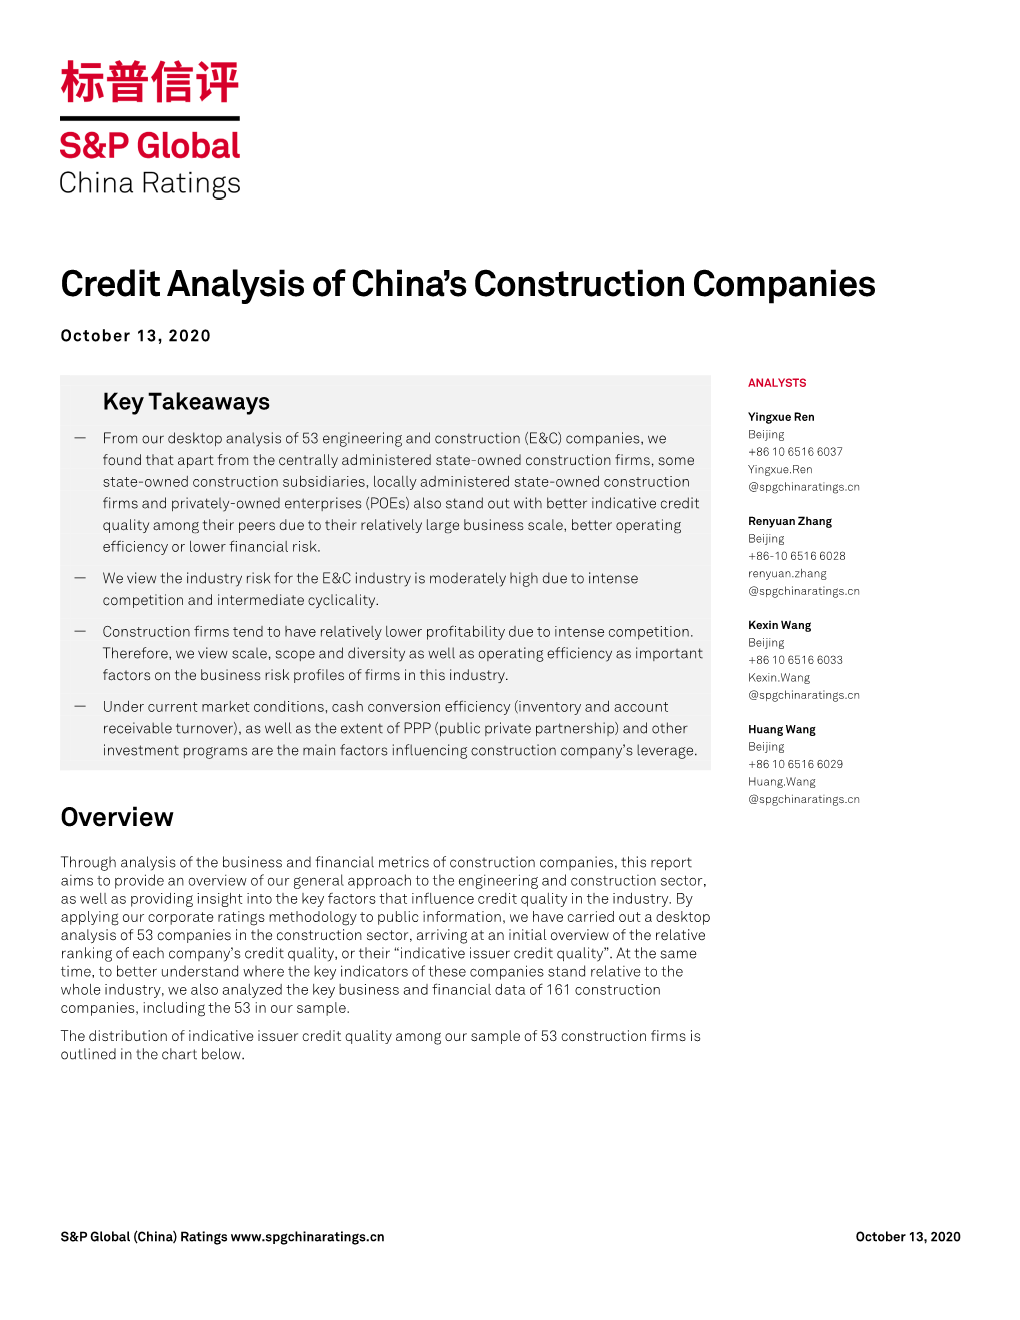 Credit Analysis of China's Construction Companies